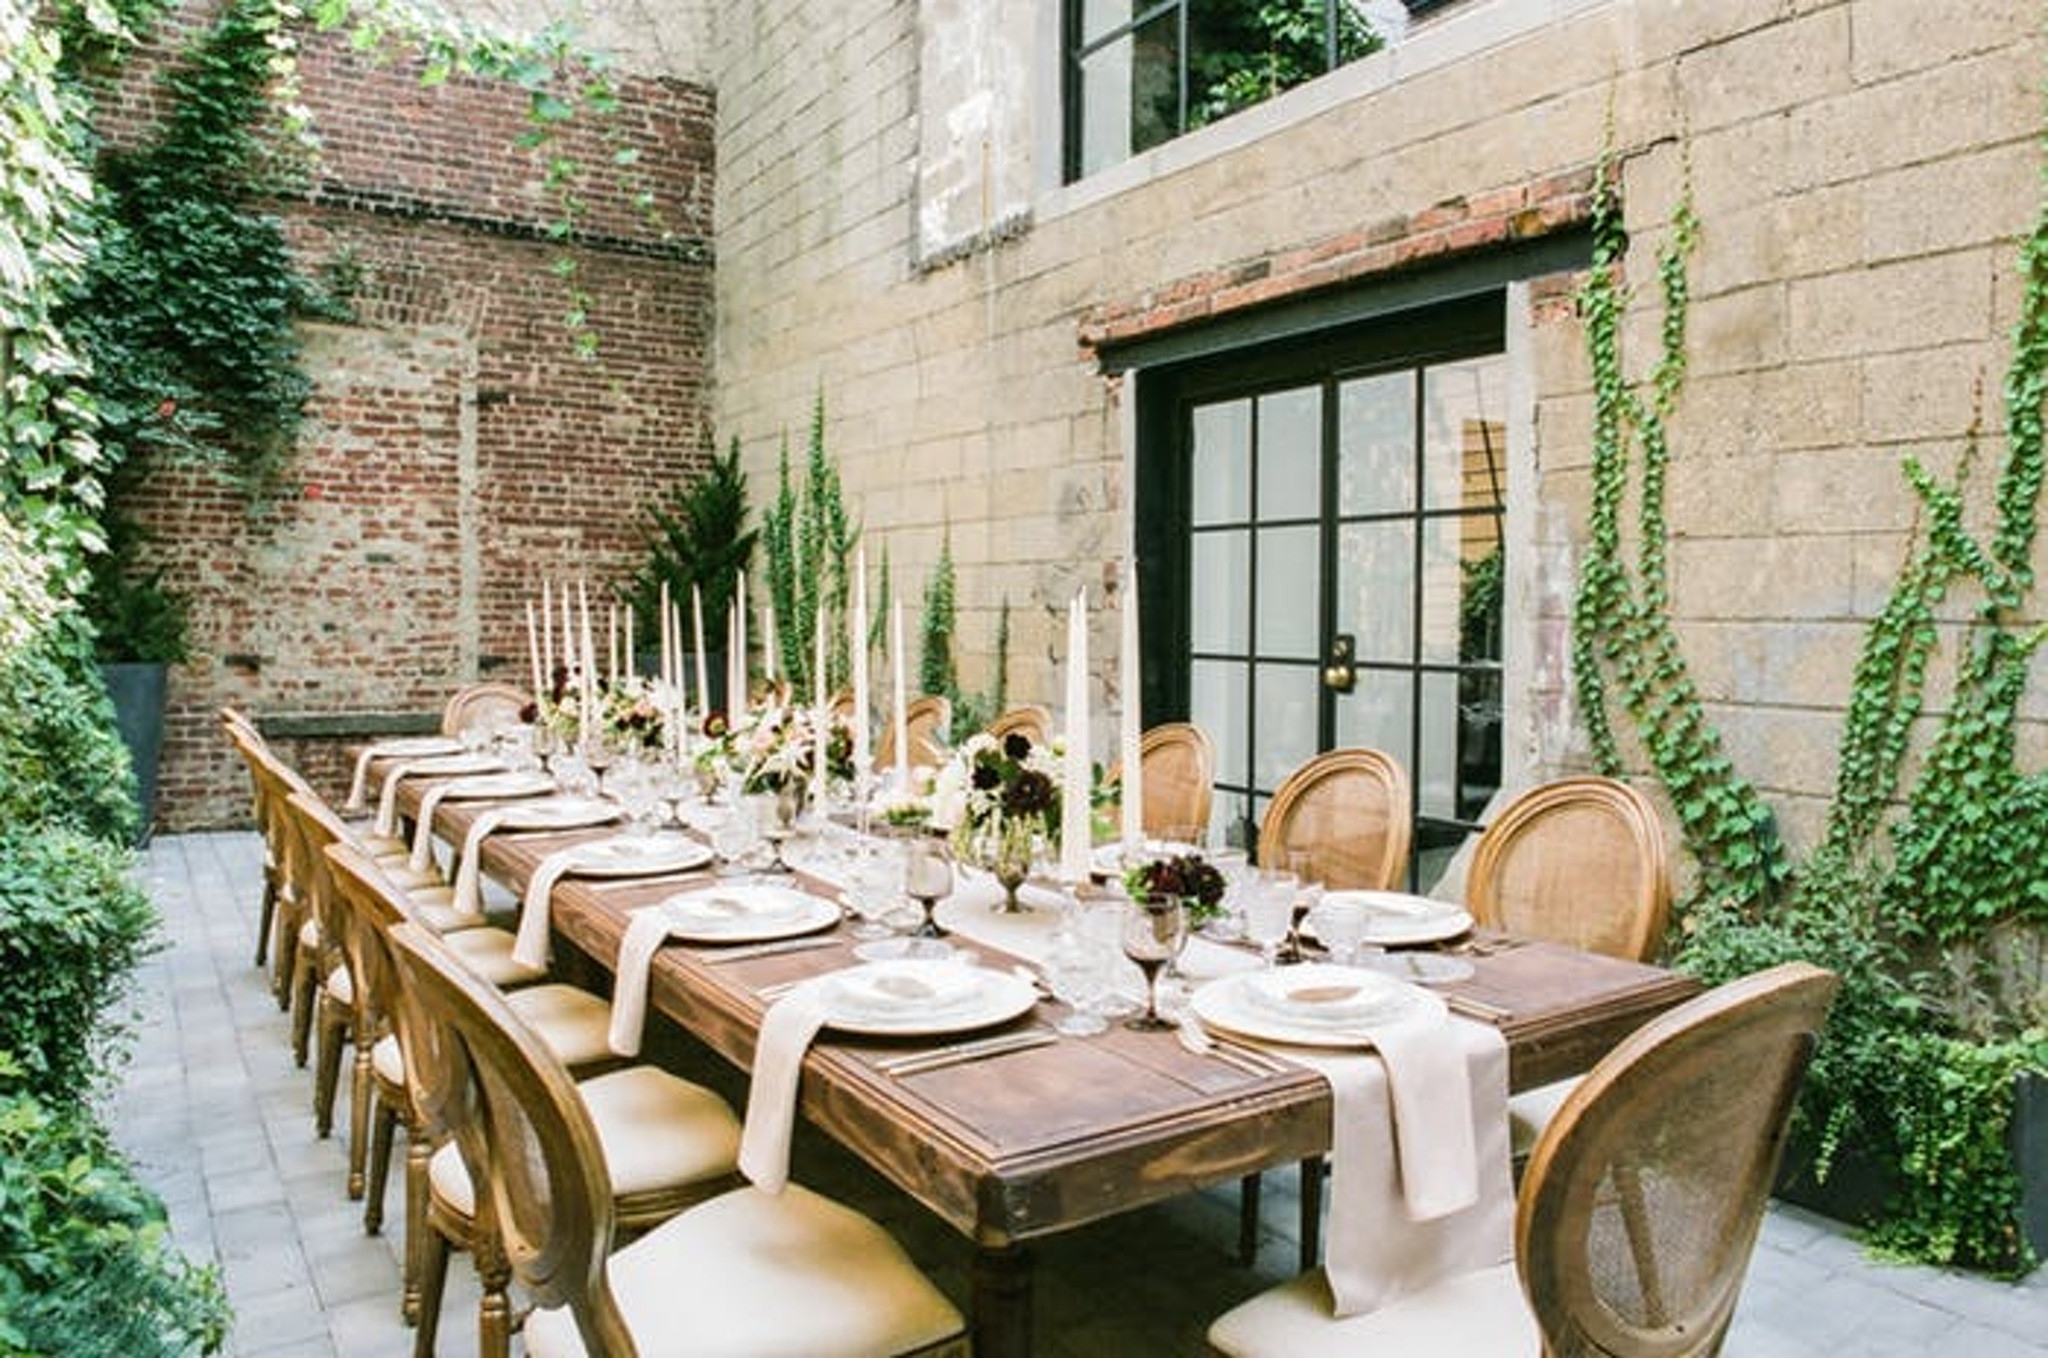 Baby Party Venues
 10 Baby Shower Venues in Brooklyn to Host a Fabulous Fête